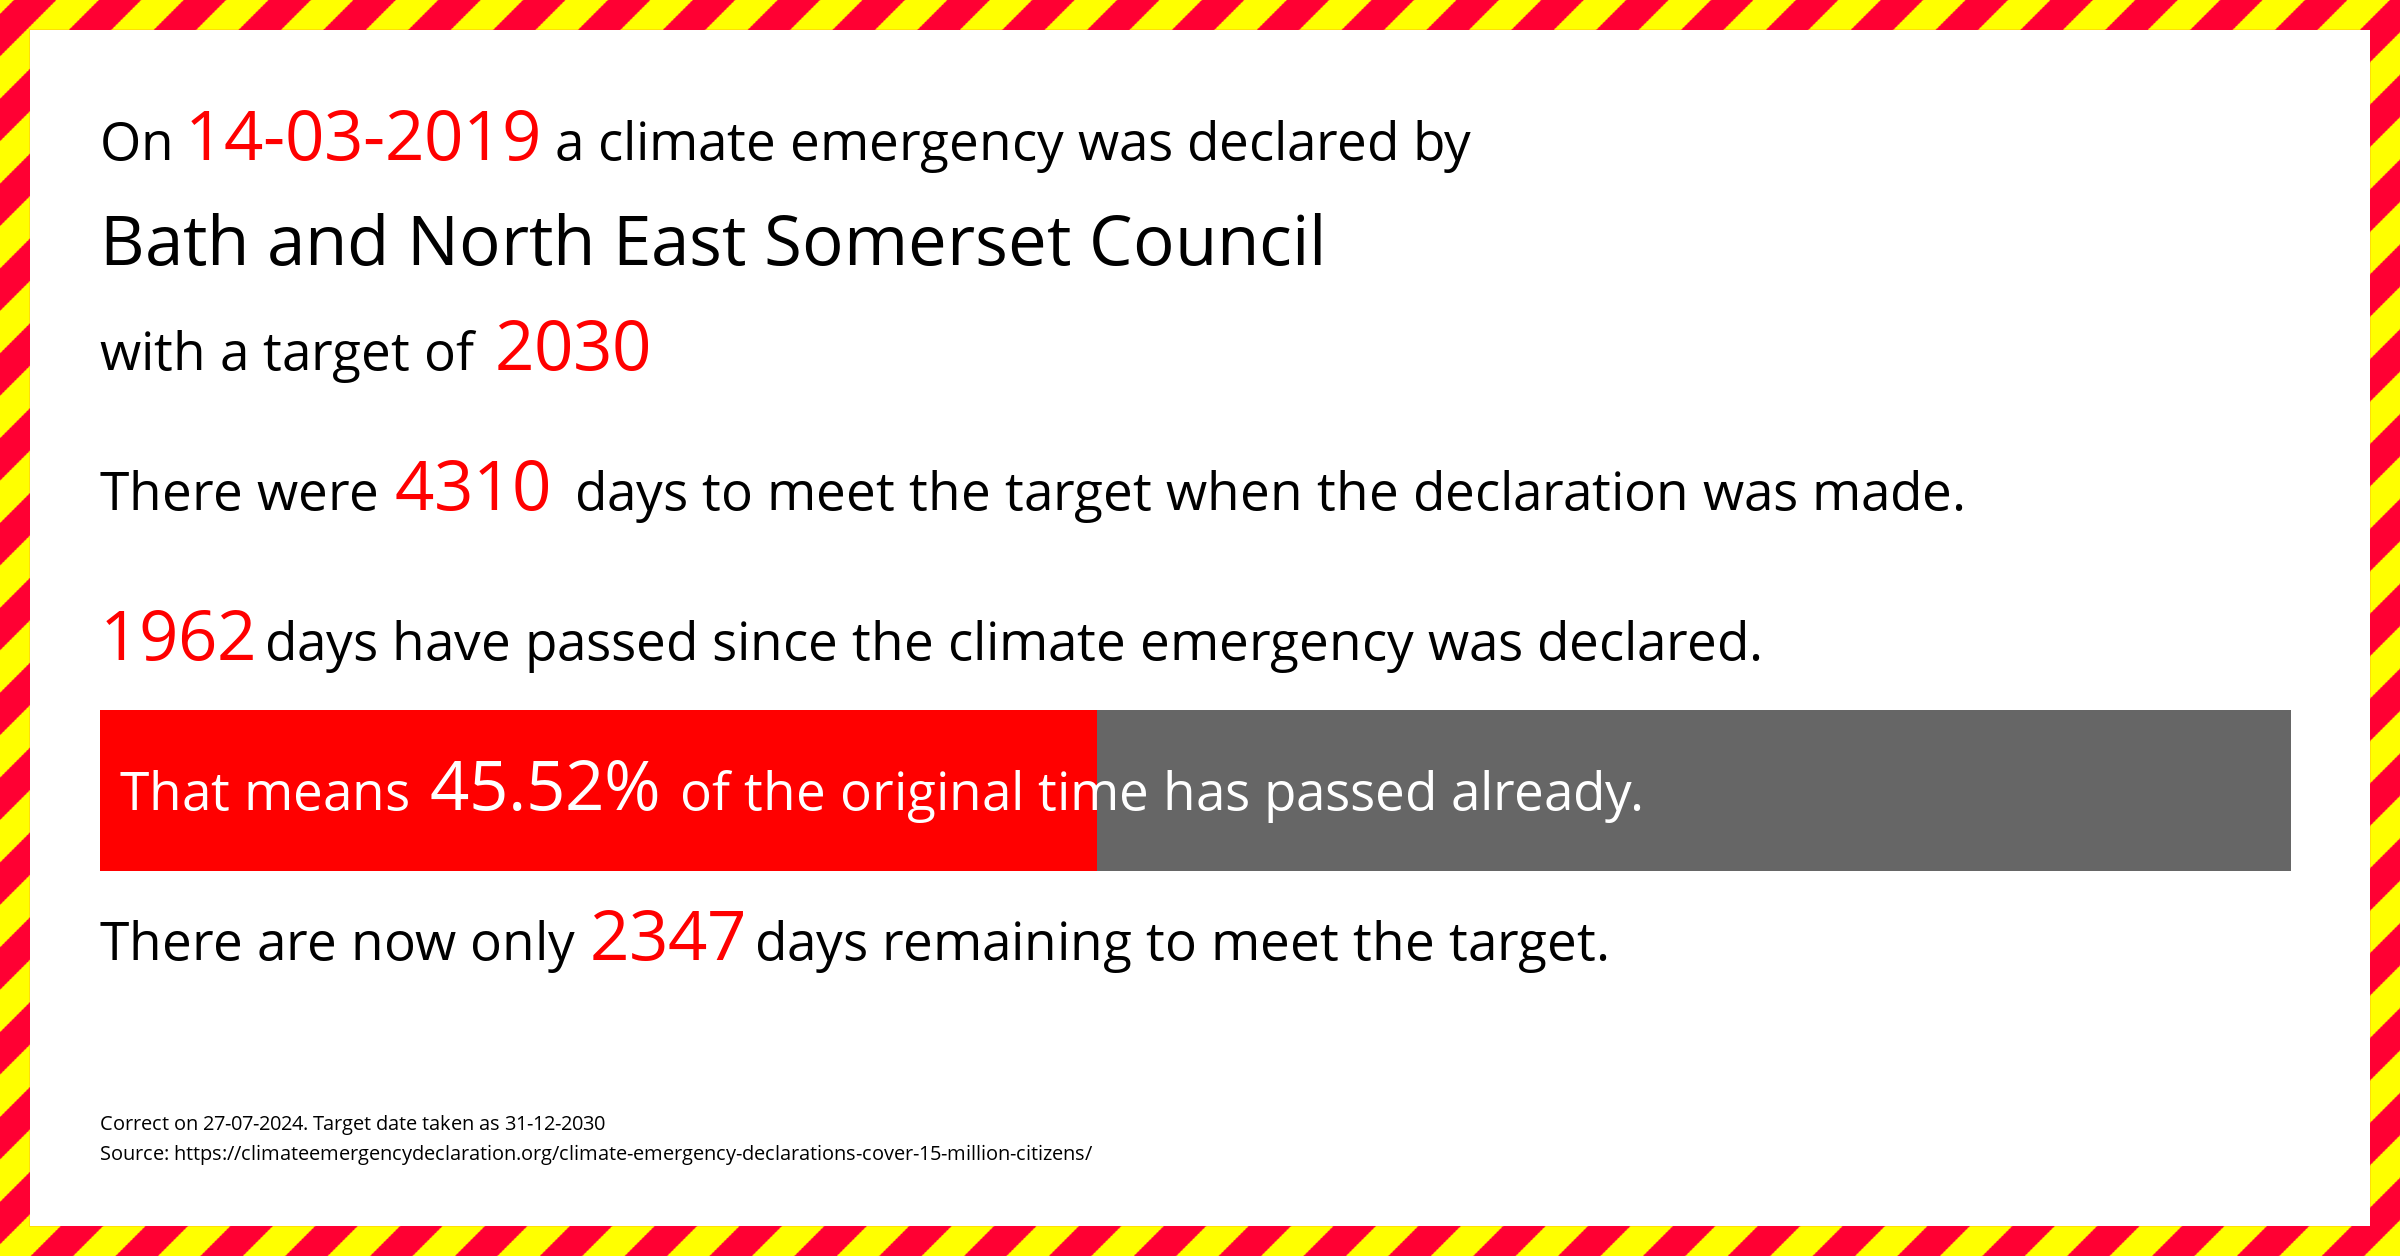 Bath and North East Somerset Council declared a Climate emergency on Thursday 14th March 2019, with a target of 2030.